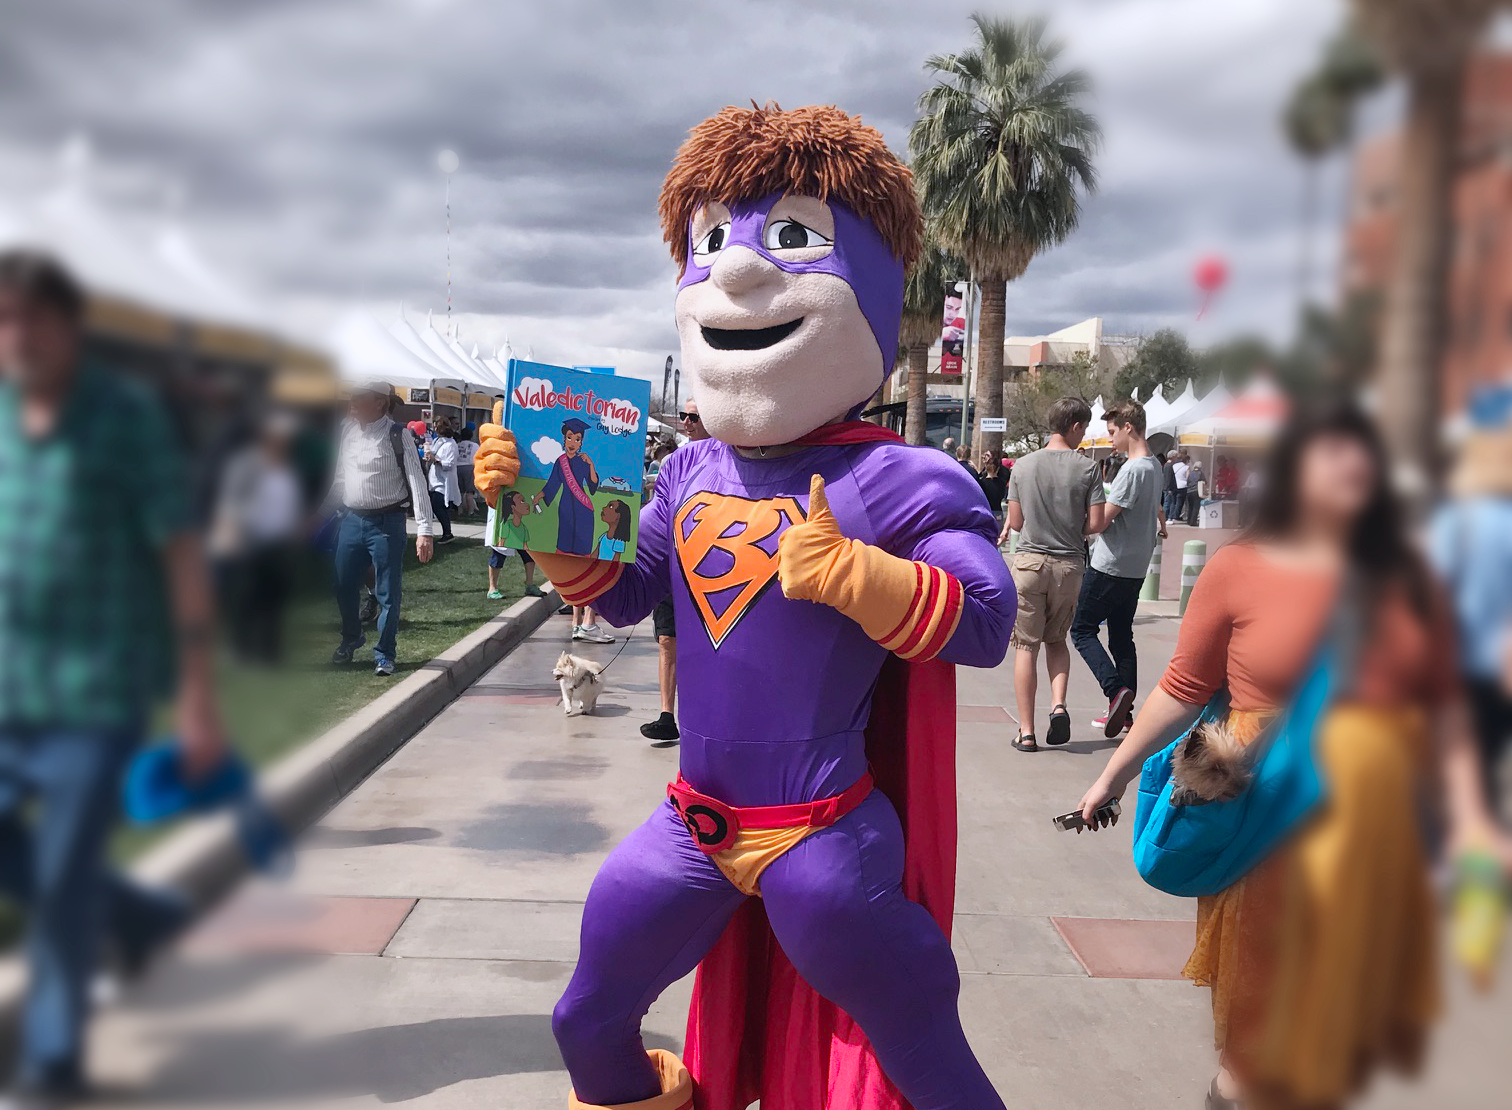 Bookmans Book Man mascot in a purple and orange costume with a cape holding a children's book at the 2019 Tucson Festival of Books